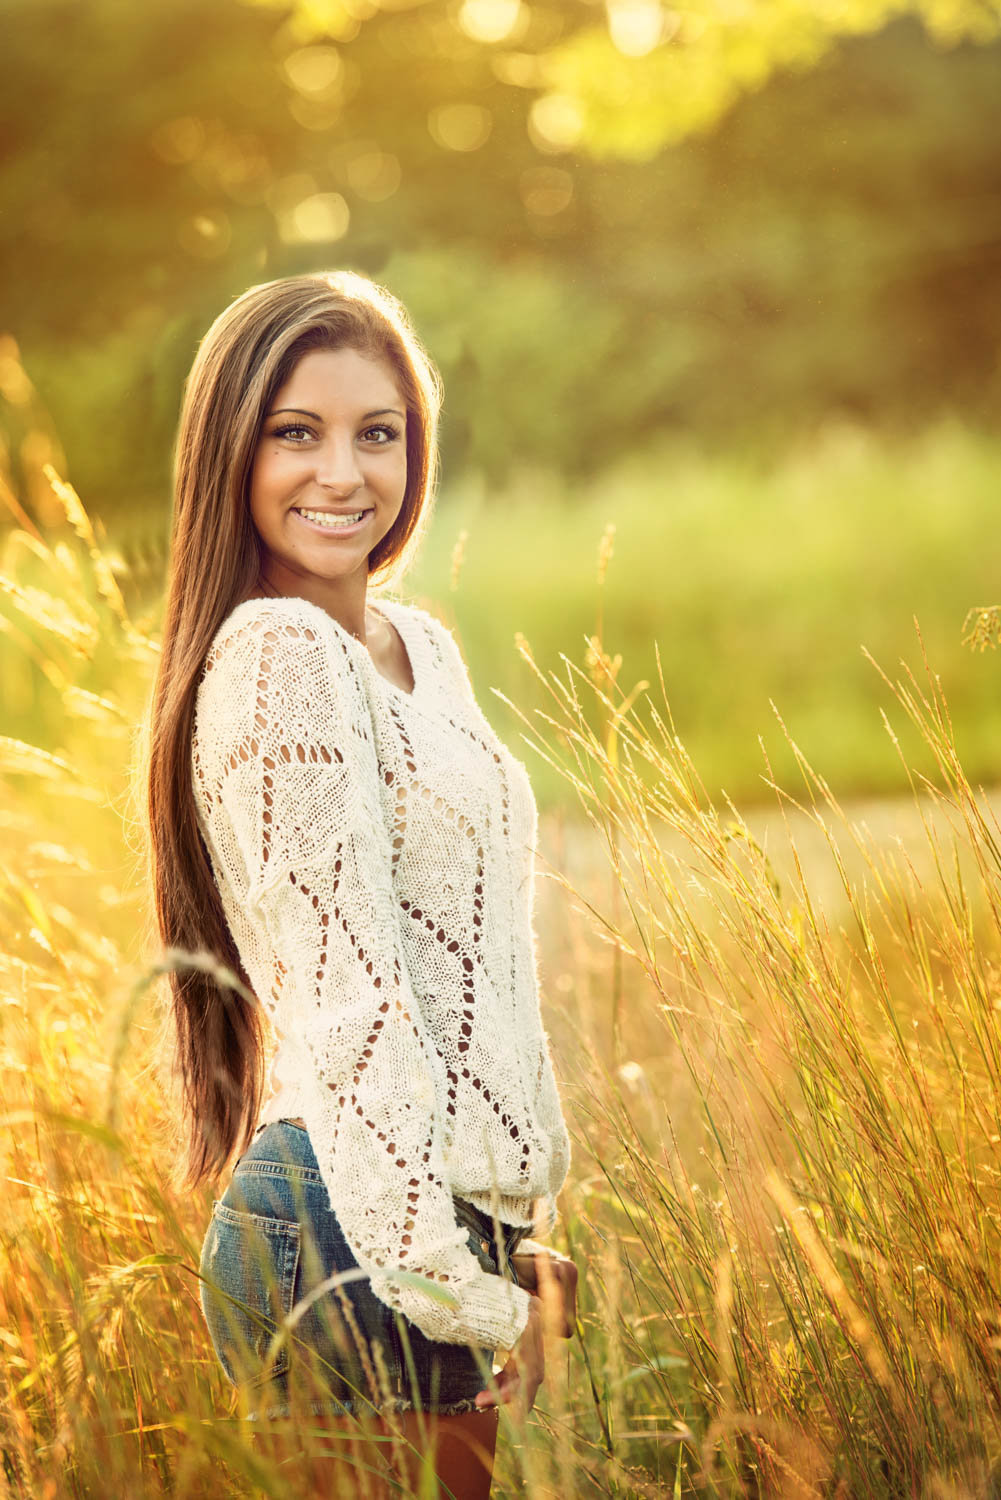 high school senior photo of girl in white sweater and cutoff jeans in the sunlight